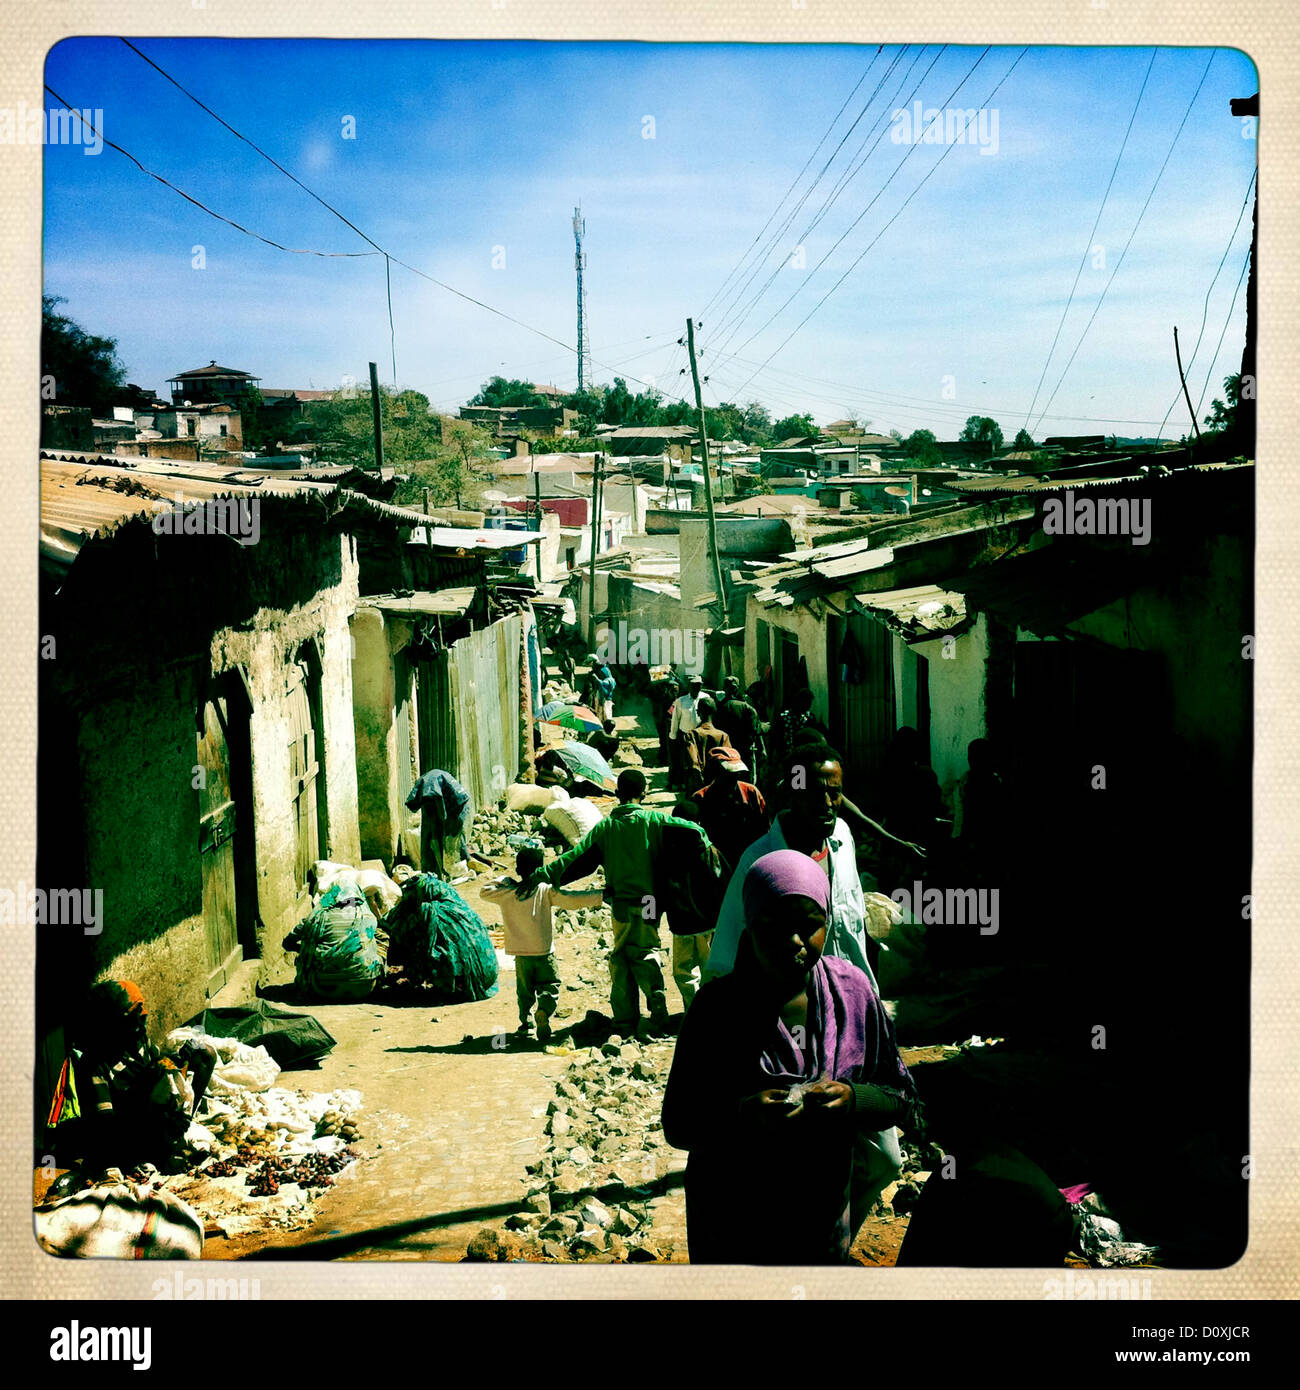 Narrow Street In The Old Town Of Harar, Ethiopia  Stock Photo